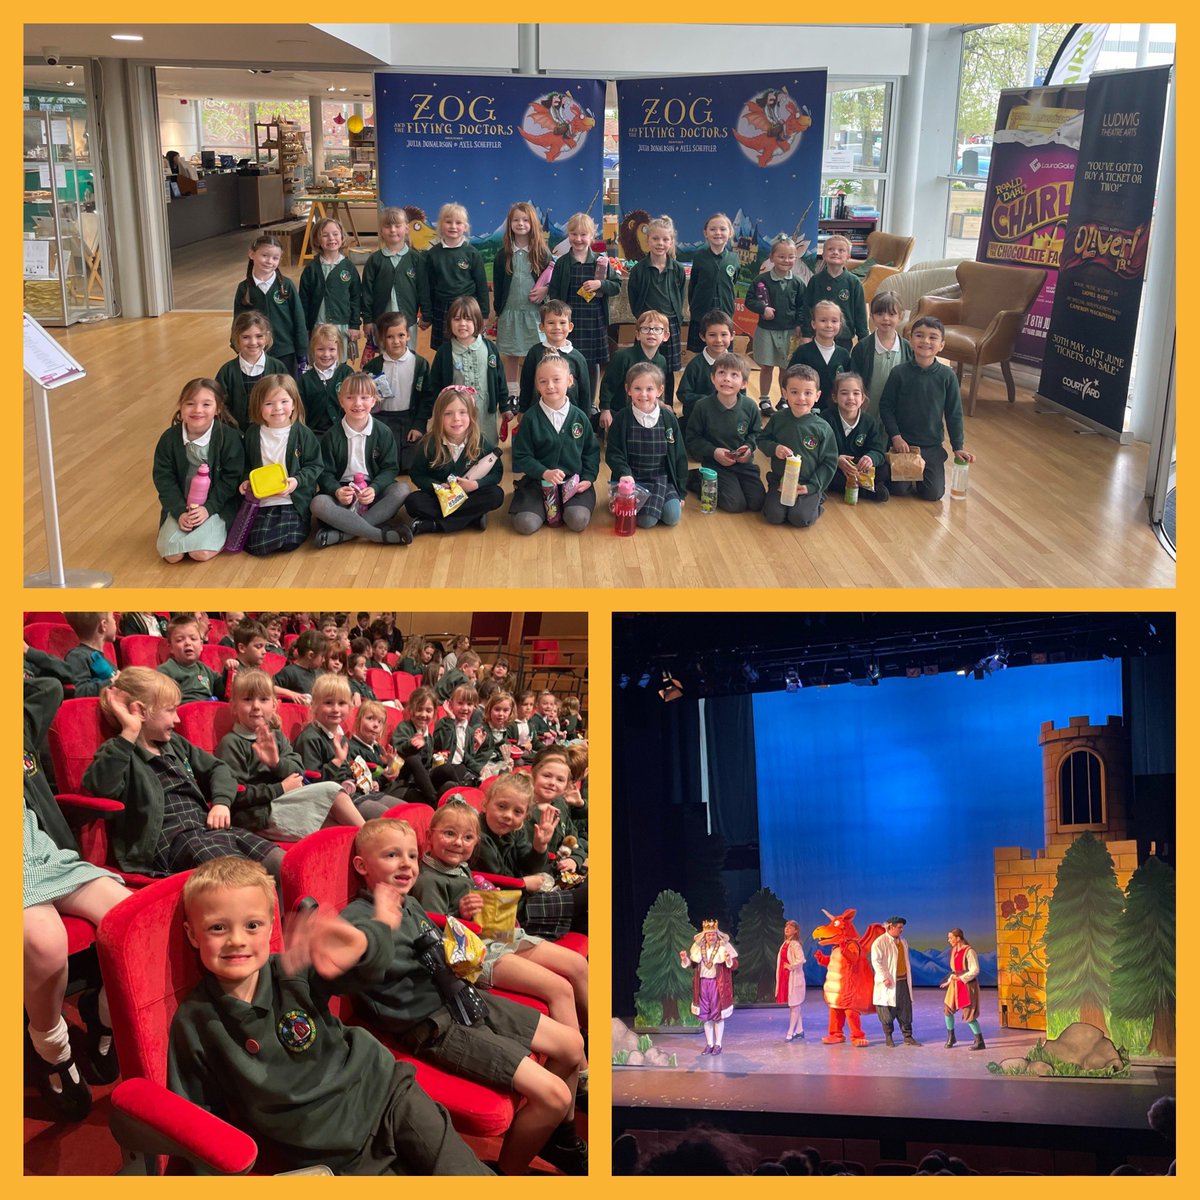 Class 1 and 2 have had a fantastic morning visiting @CourtyardArts in Hereford! We all loved watching ‘Zog and the Flying Doctors’! 🧡🤩🎭